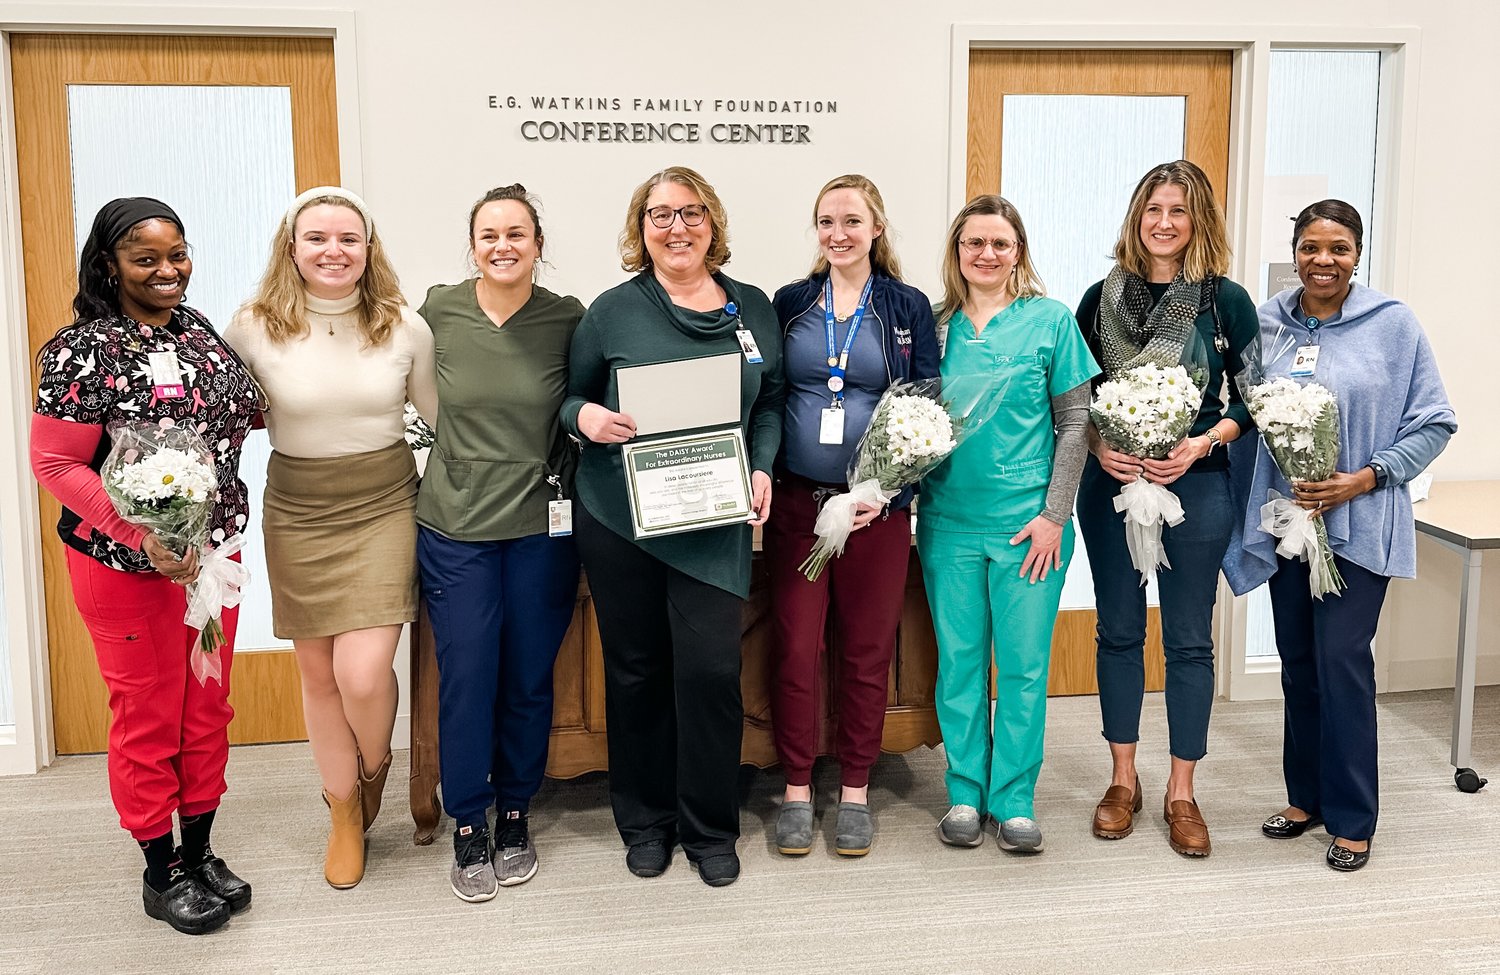 Ruth Tonico, RN, Rose Klein, RN, Sophie Civitarese, RN, Lisa Lacoursiere, RN, Meghan Corcoran, RN, Suzanne Carroll, RN, Molly Harding, NP, and Pam James, RN.